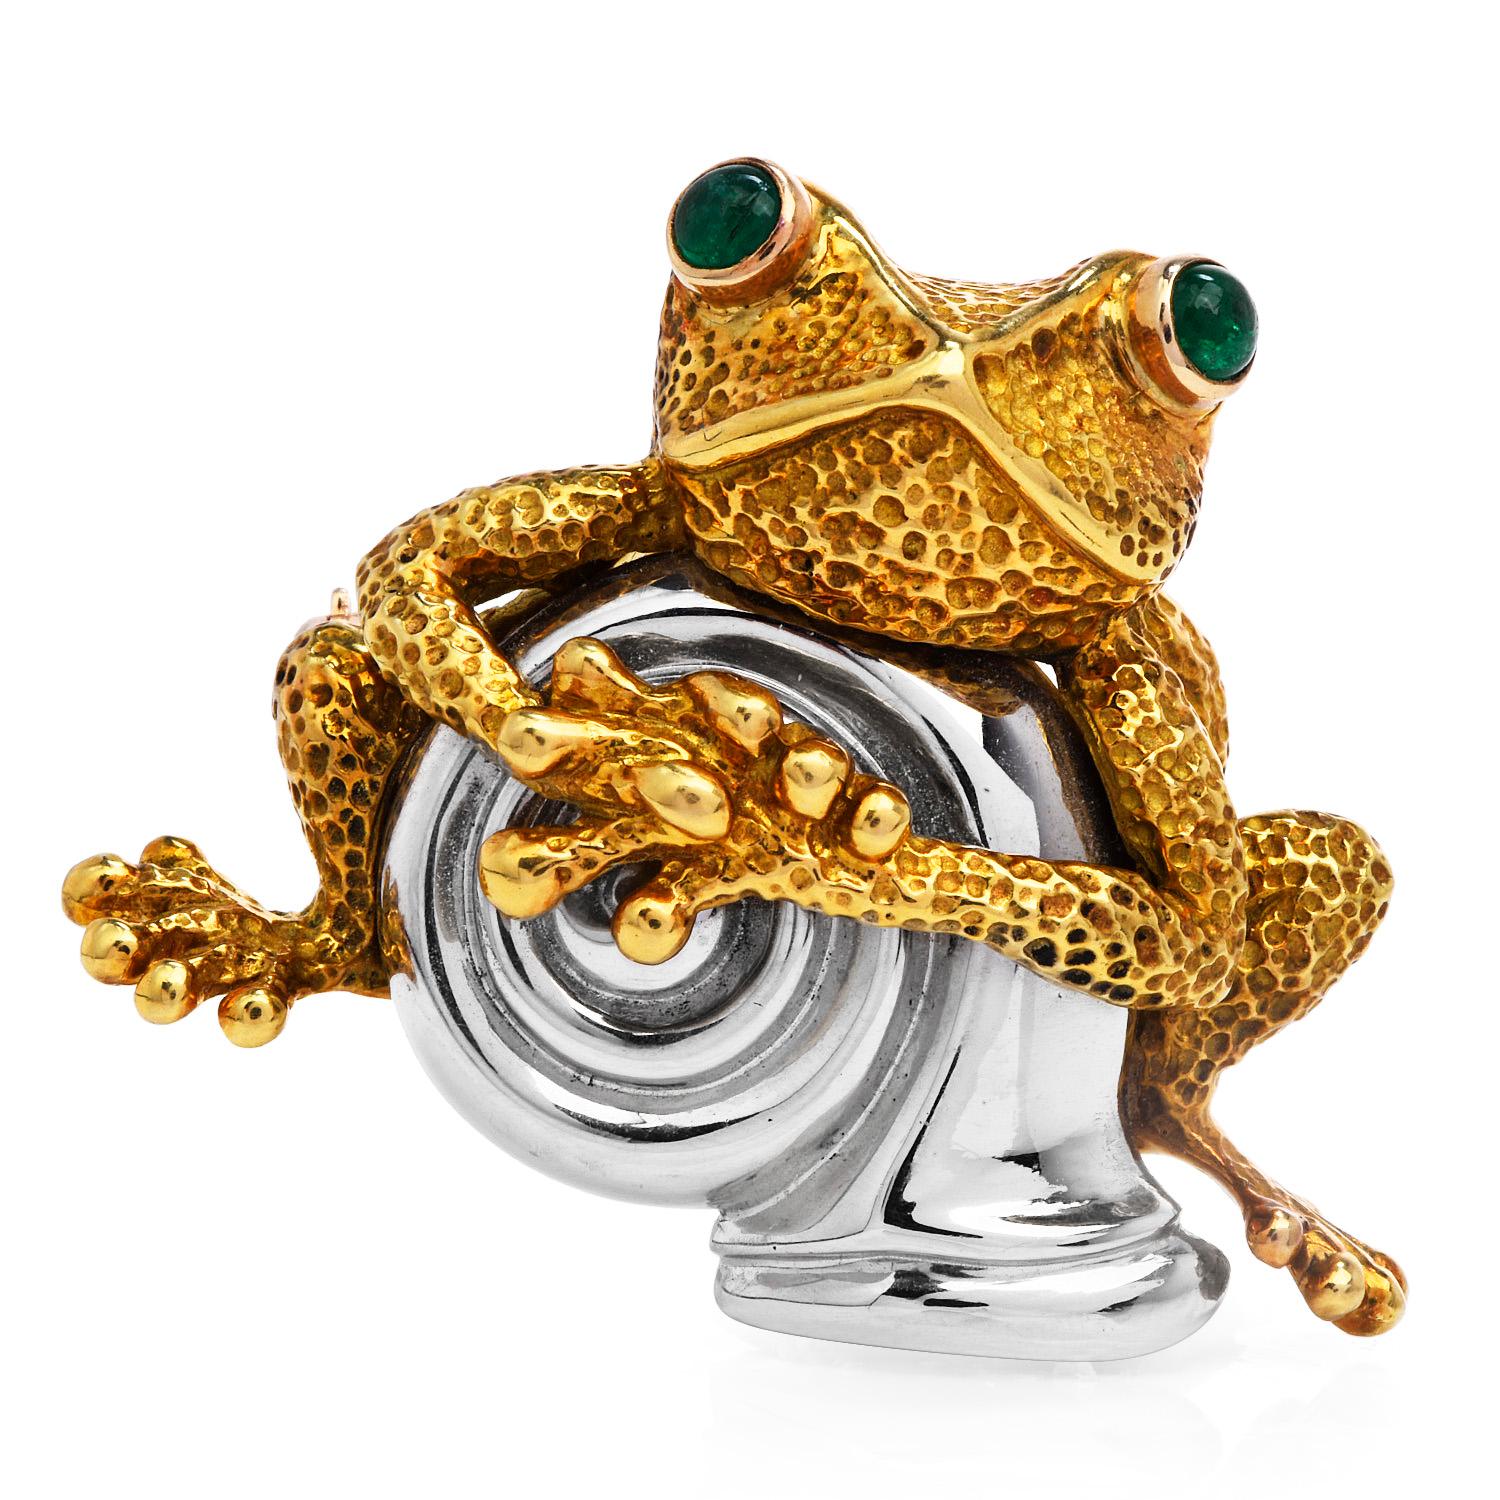  A true masterpiece from Ralph K. Lindsay & Jerome Hoenig, Lindsay & co. was founded in 1943, and it is characterized for combining metals on their pieces.

Inspired by a Frog Motif, presents a highly textured finish 18k yellow gold, and with a